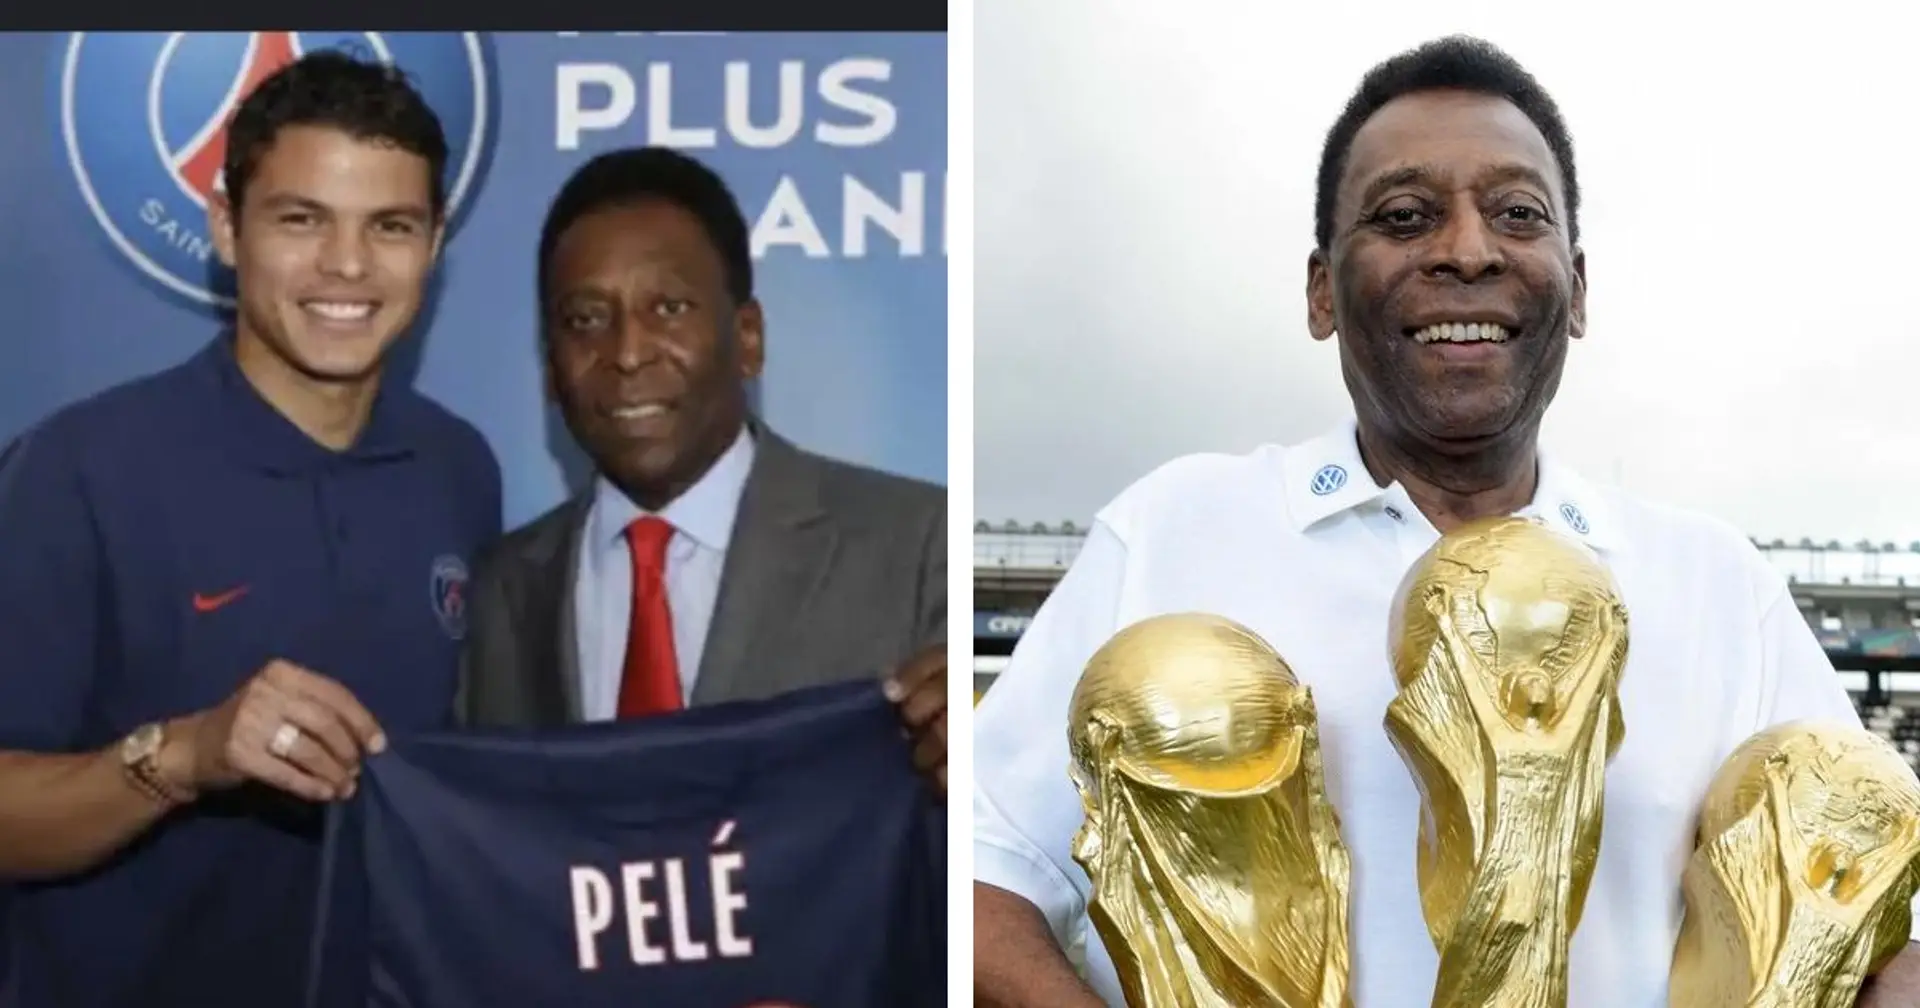 Chelsea players pay tribute to Pele